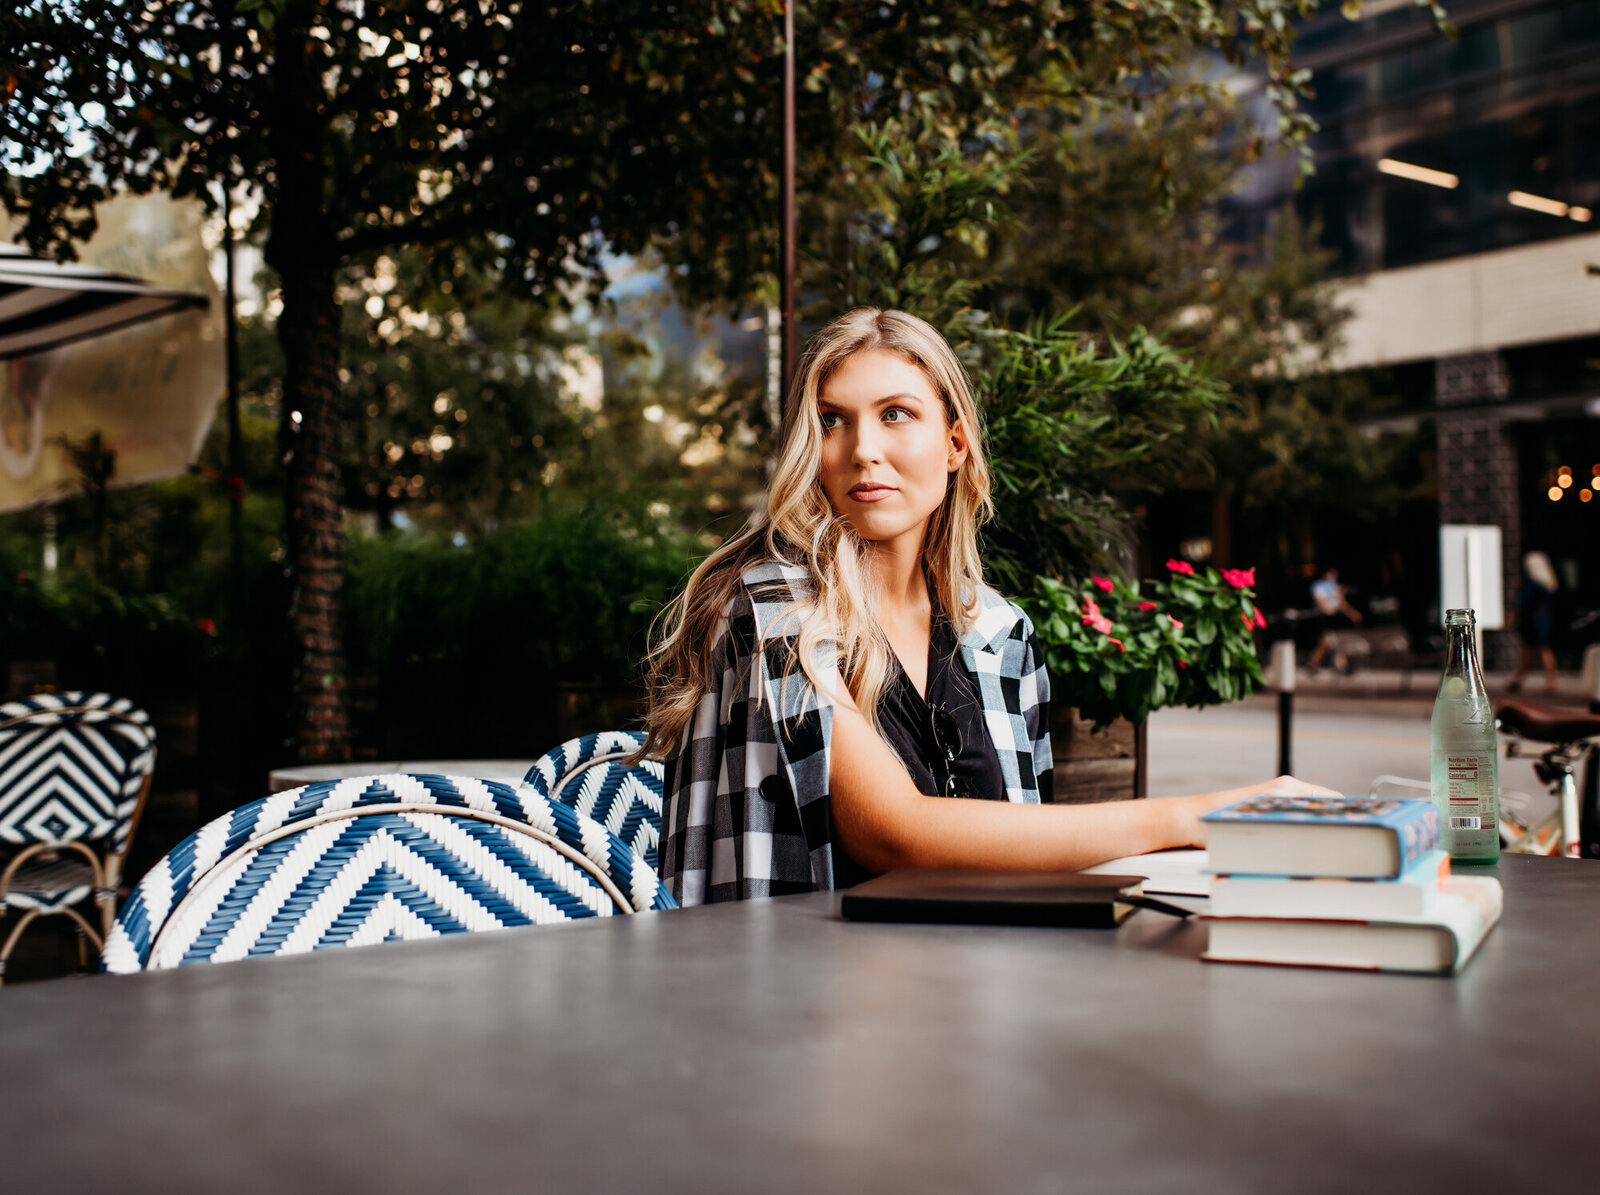 Branding Photographer, a woman sits at an outdoor table with her books